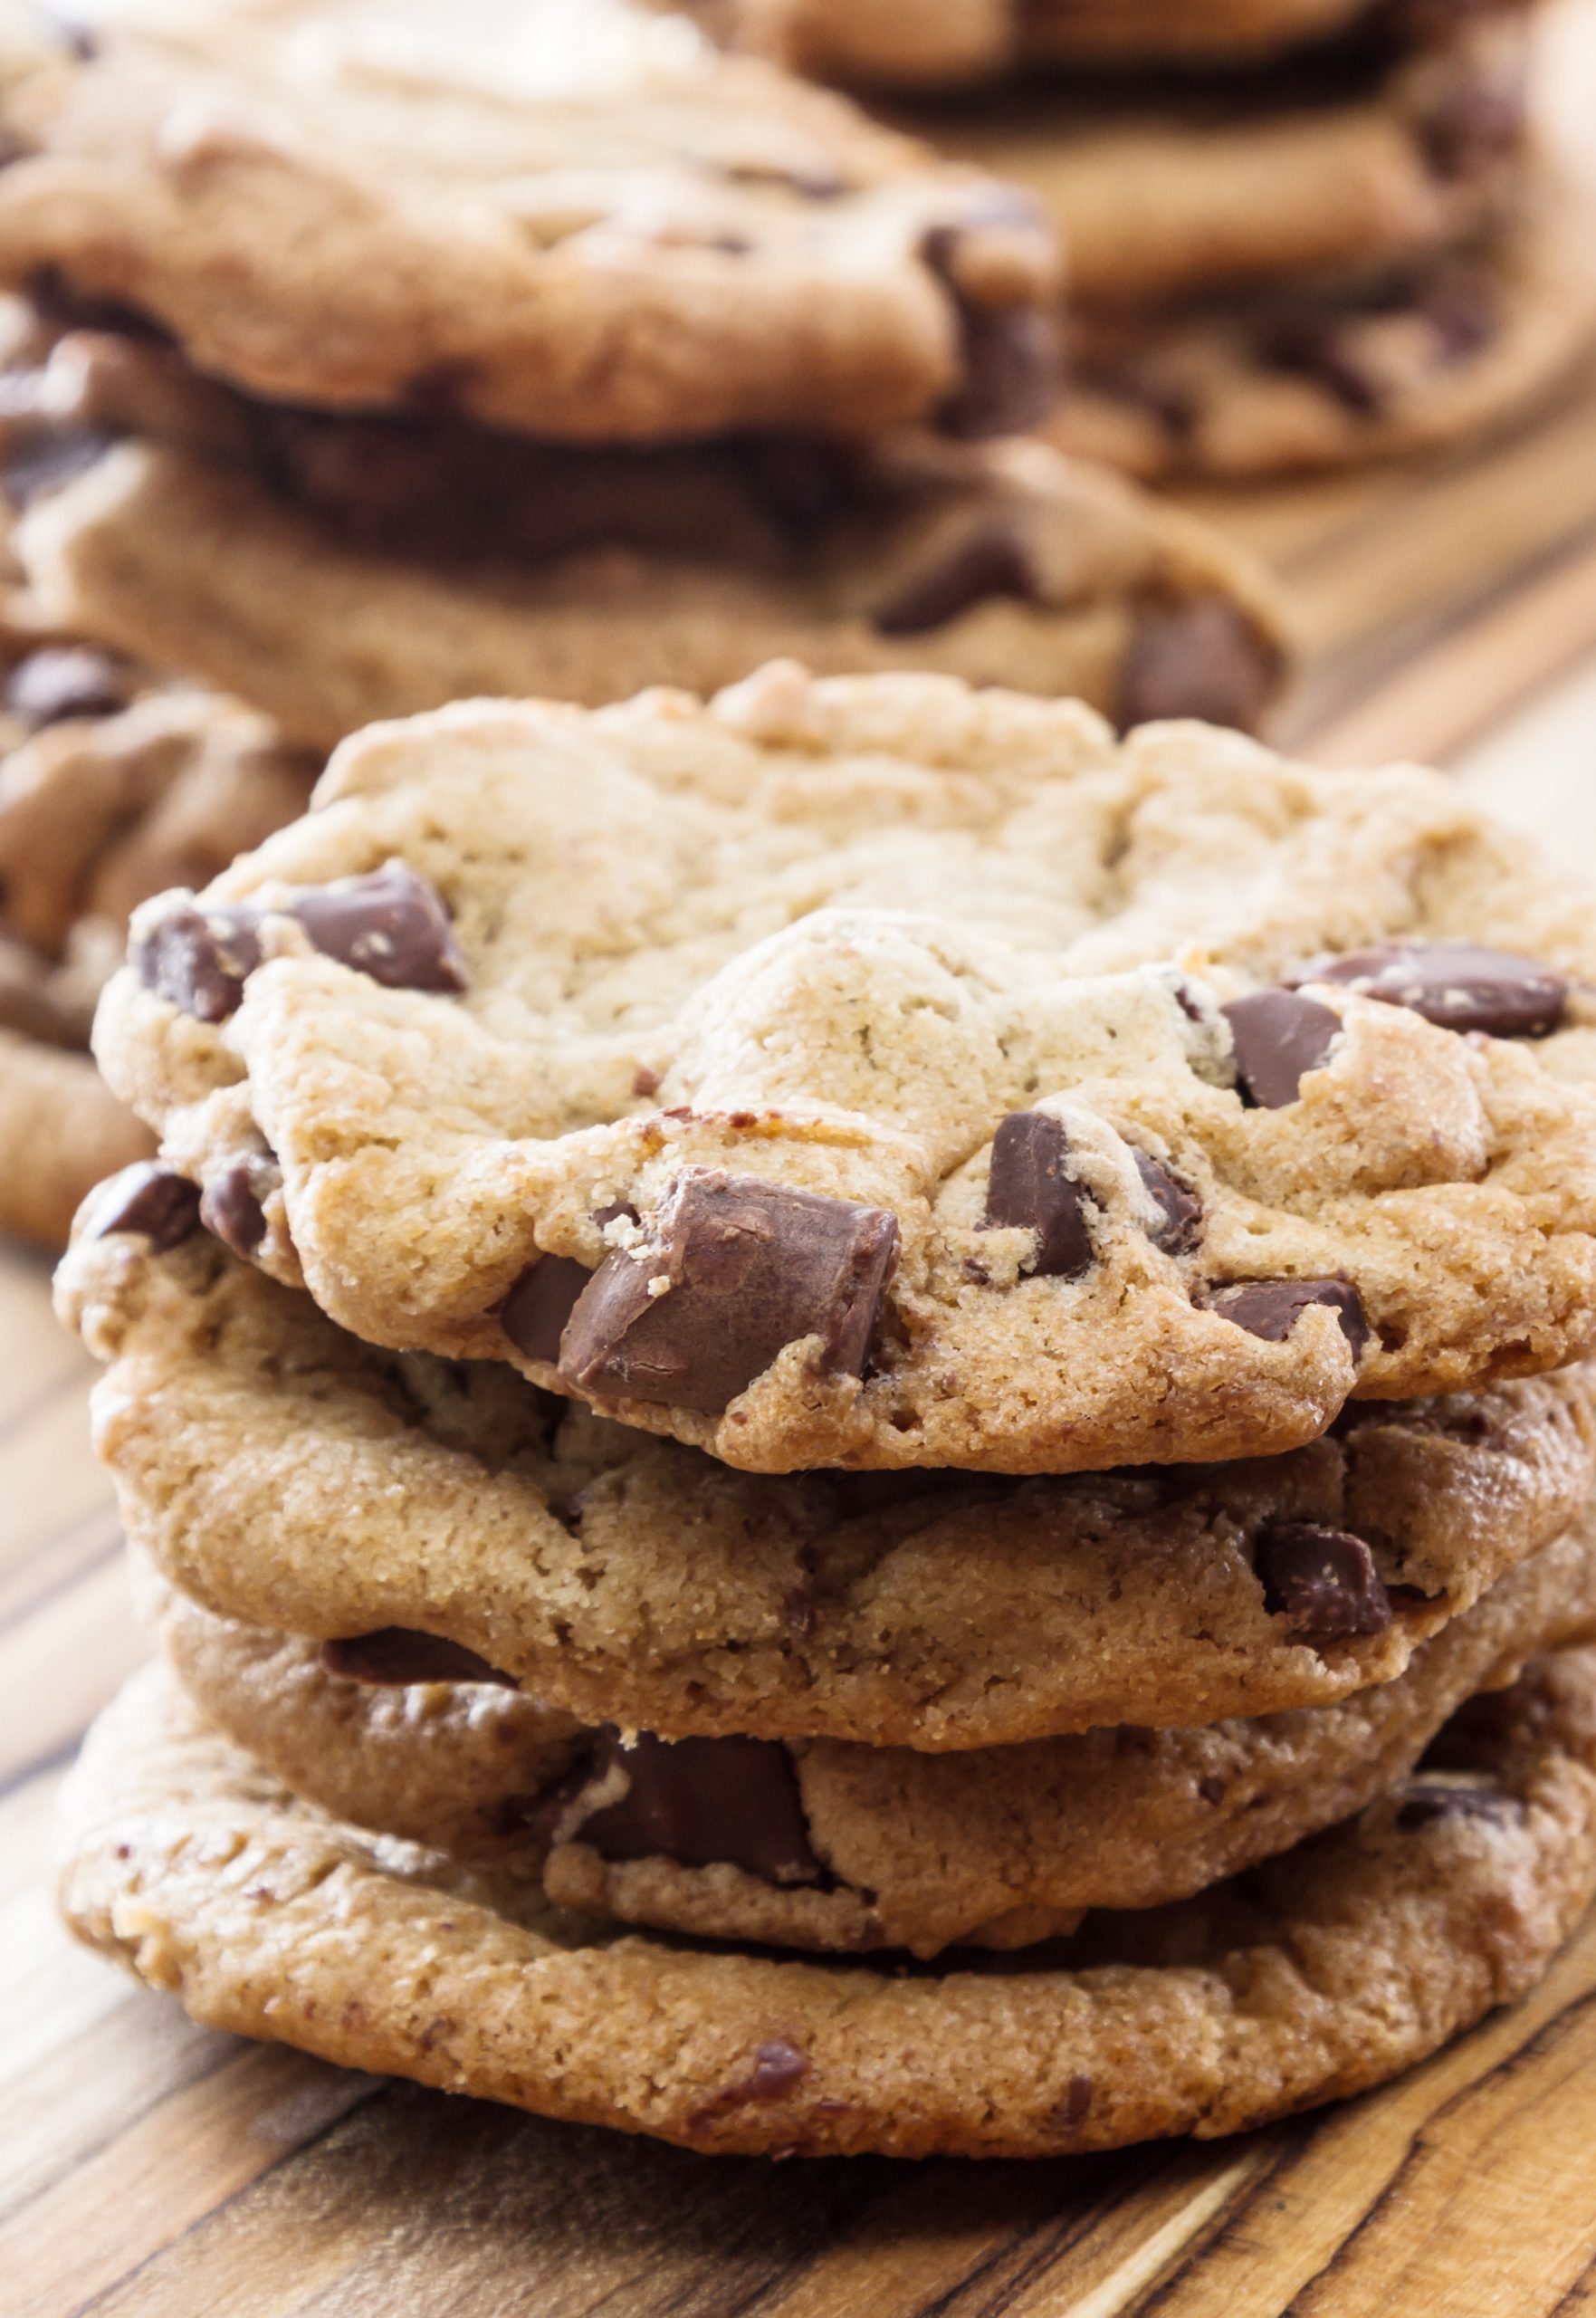 Guiltless chocolate chip cookies arranged on a wooden table.